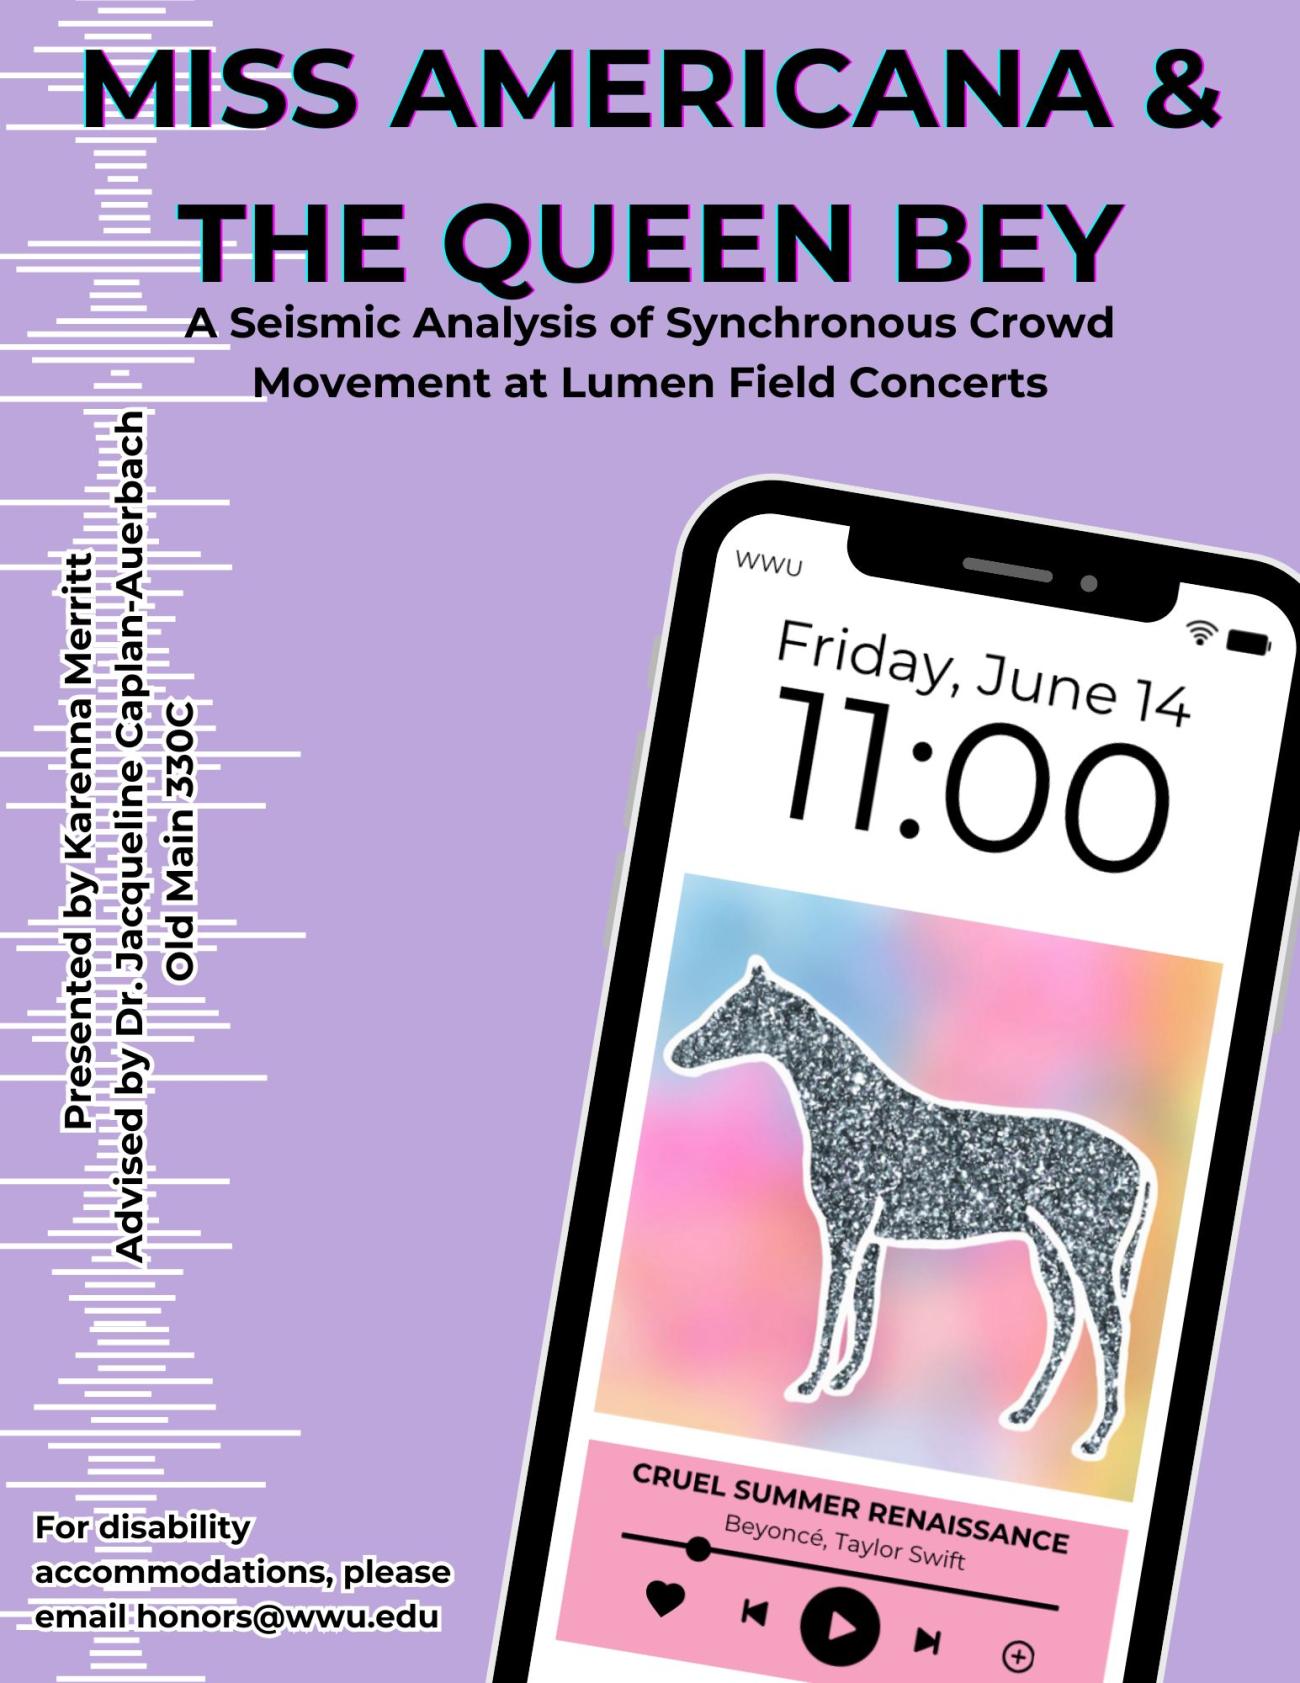 A lavender poster depicts a smartphone with the presentation’s date and time, “Friday, June 14” at “11:00”; a fictitious song titled "CRUEL SUMMER RENAISSANCE" plays on the screen. The title reads, “MISS AMERICANA & THE QUEEN BEY”, with “A Seismic Analysis of Synchronous Crowd Movement at Lumen Field Concerts” as a subtitle. Additional text reads, “Presented by Karenna Merritt. Advised by Dr. Jacqueline Caplan-Auerbach. Old Main 330C. For disability accommodations, please email honors@wwu.edu”.